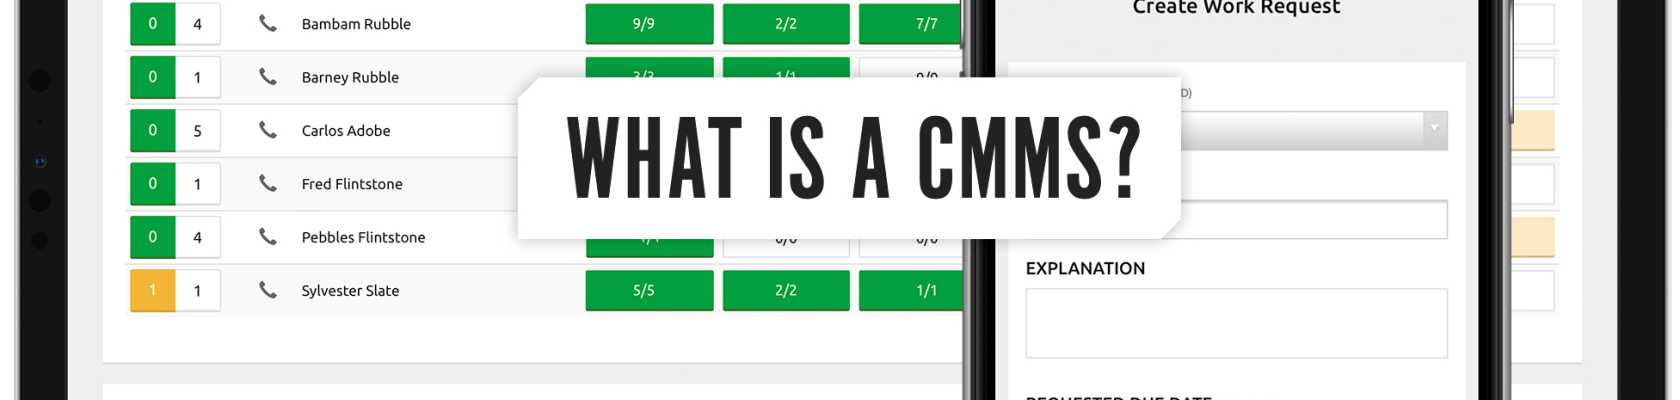 What is a CMMS? 